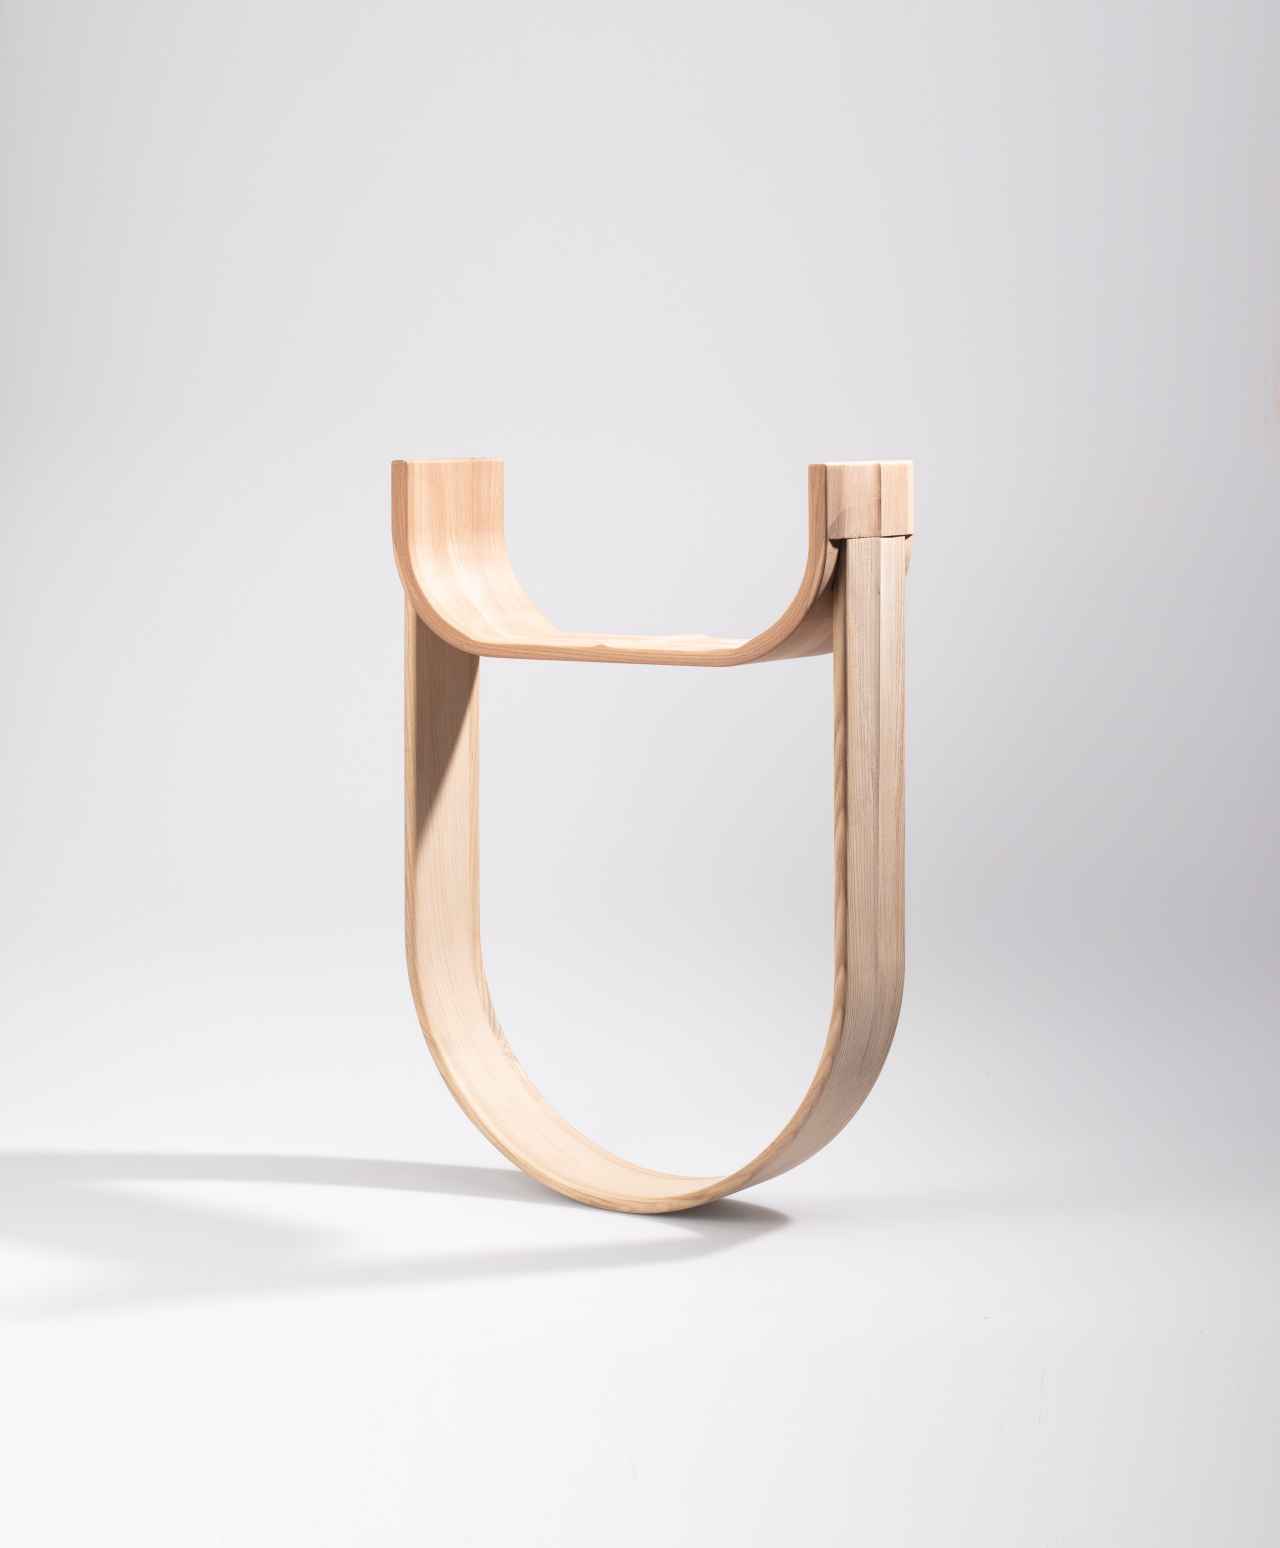 stool with lower part bent into a half-circle shape